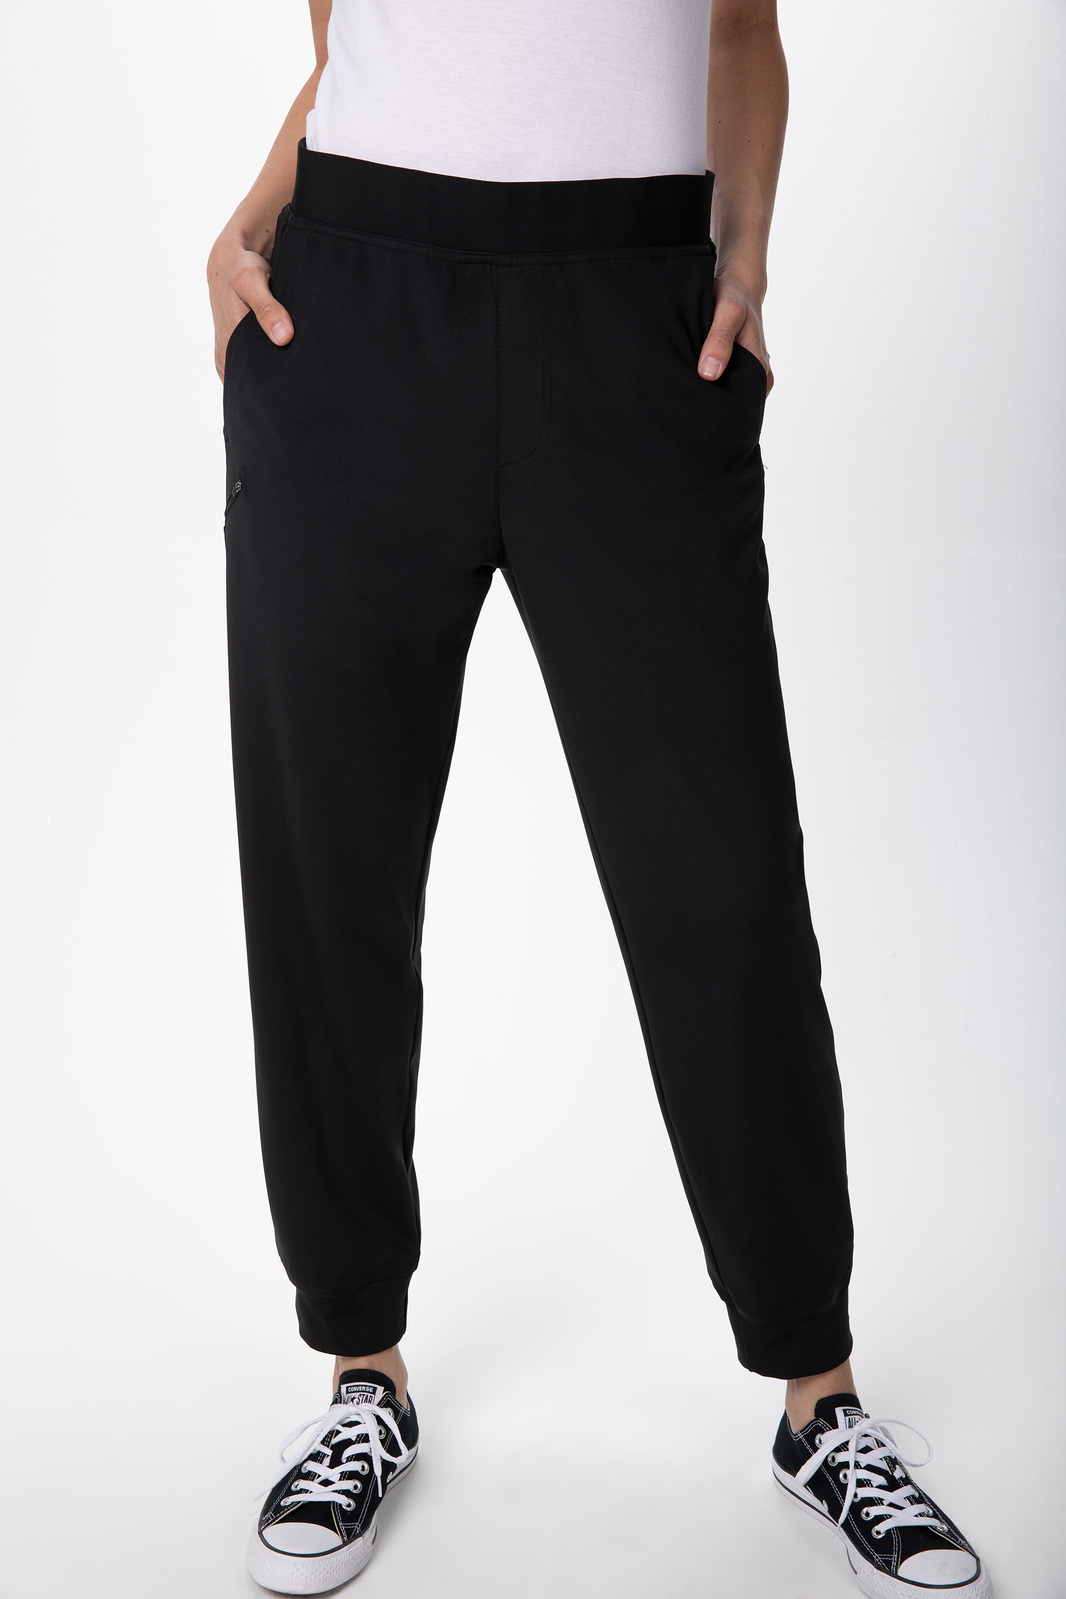 Jogger 2.0 Chef Pants - Chef Works